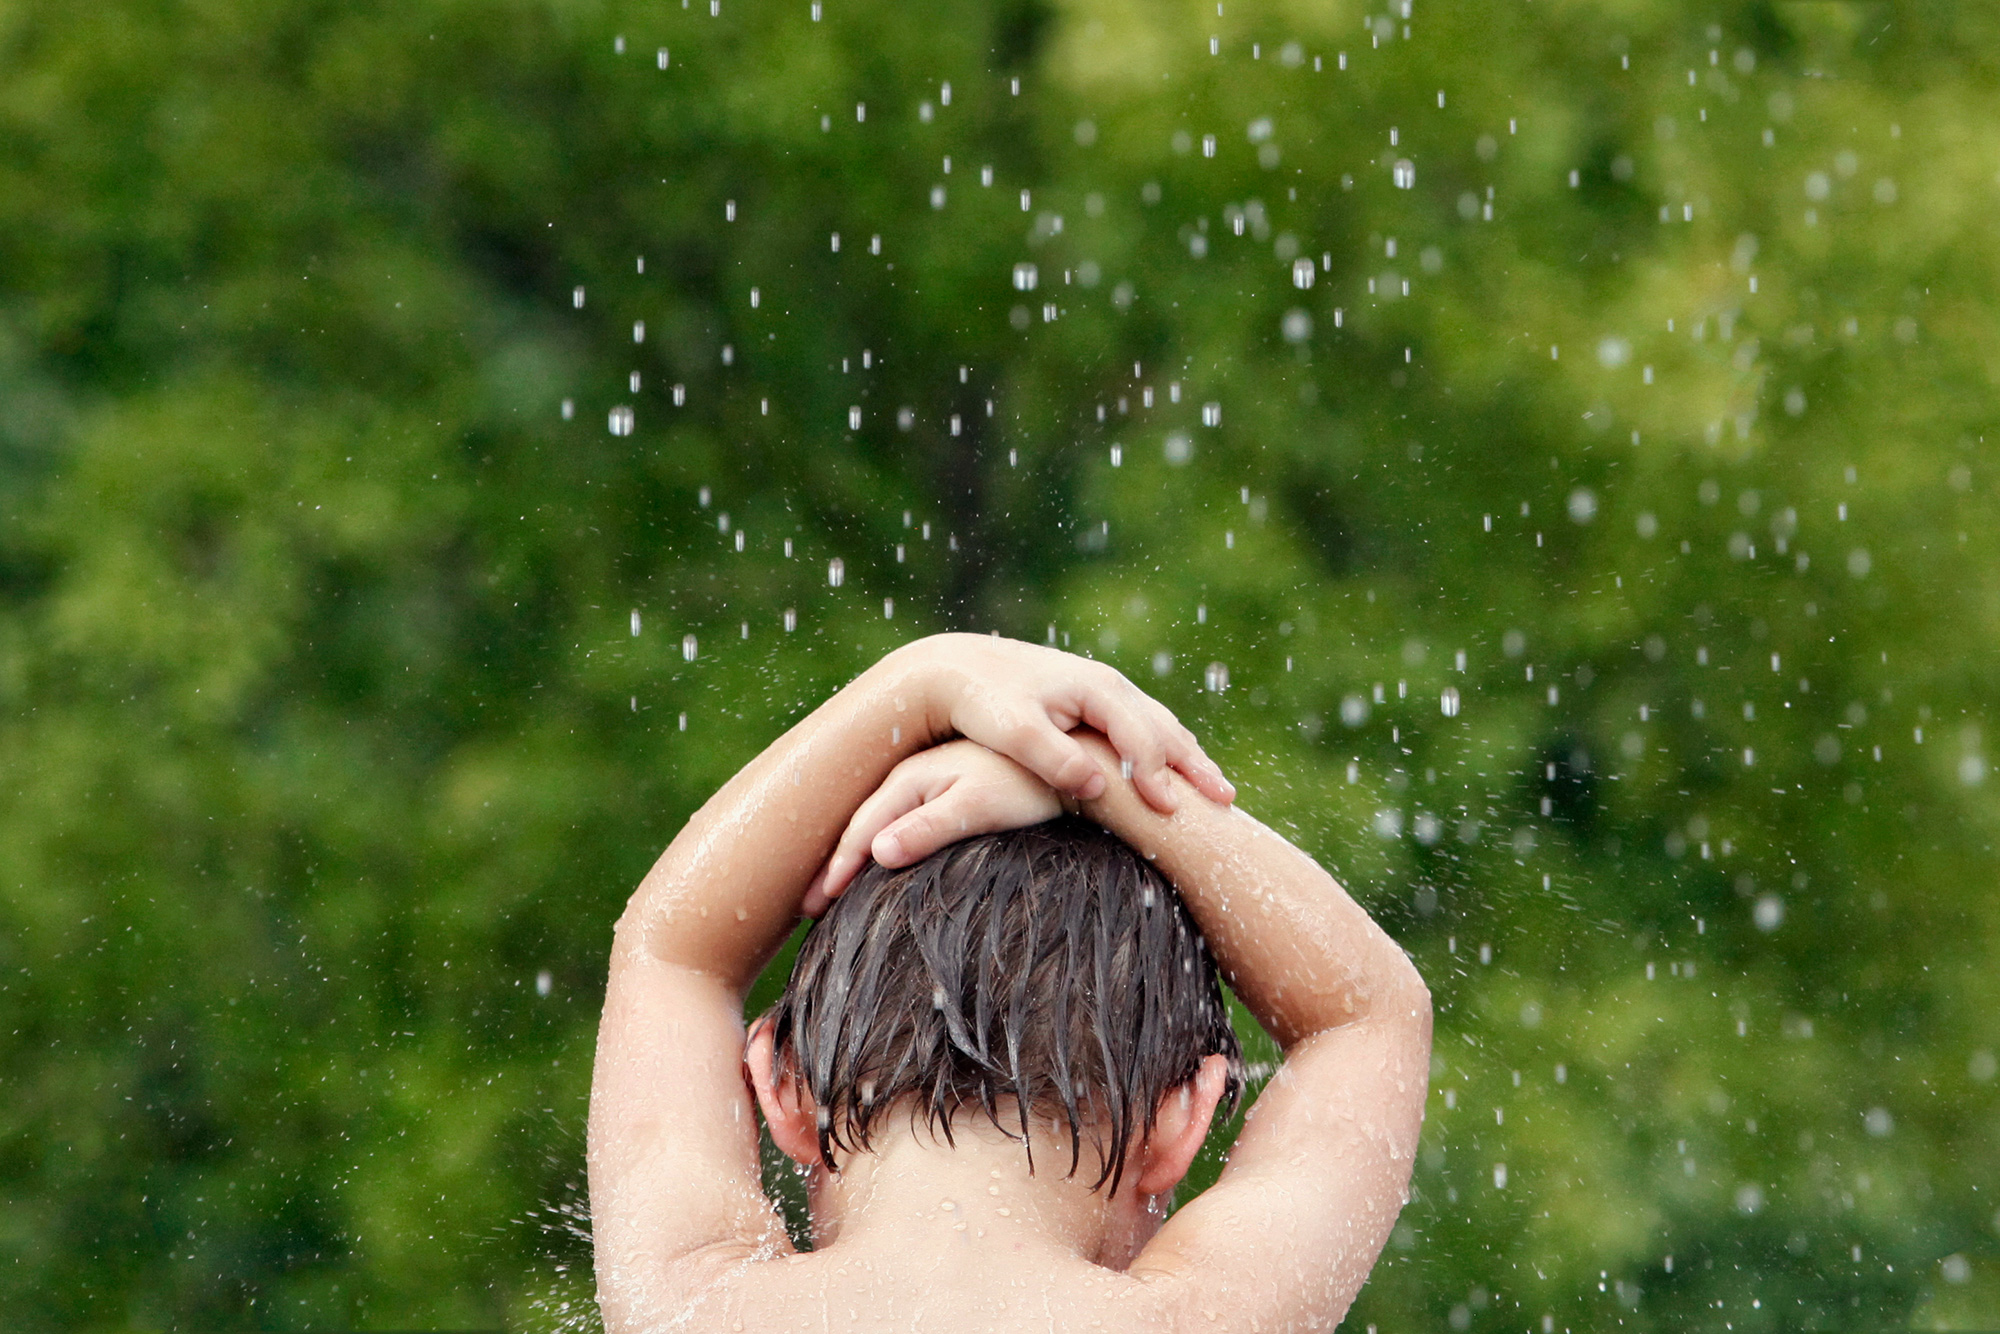 A boy plays in a water fountain at Discovery Green park in downtown Houston, Texas, photographed by Todd Spoth.